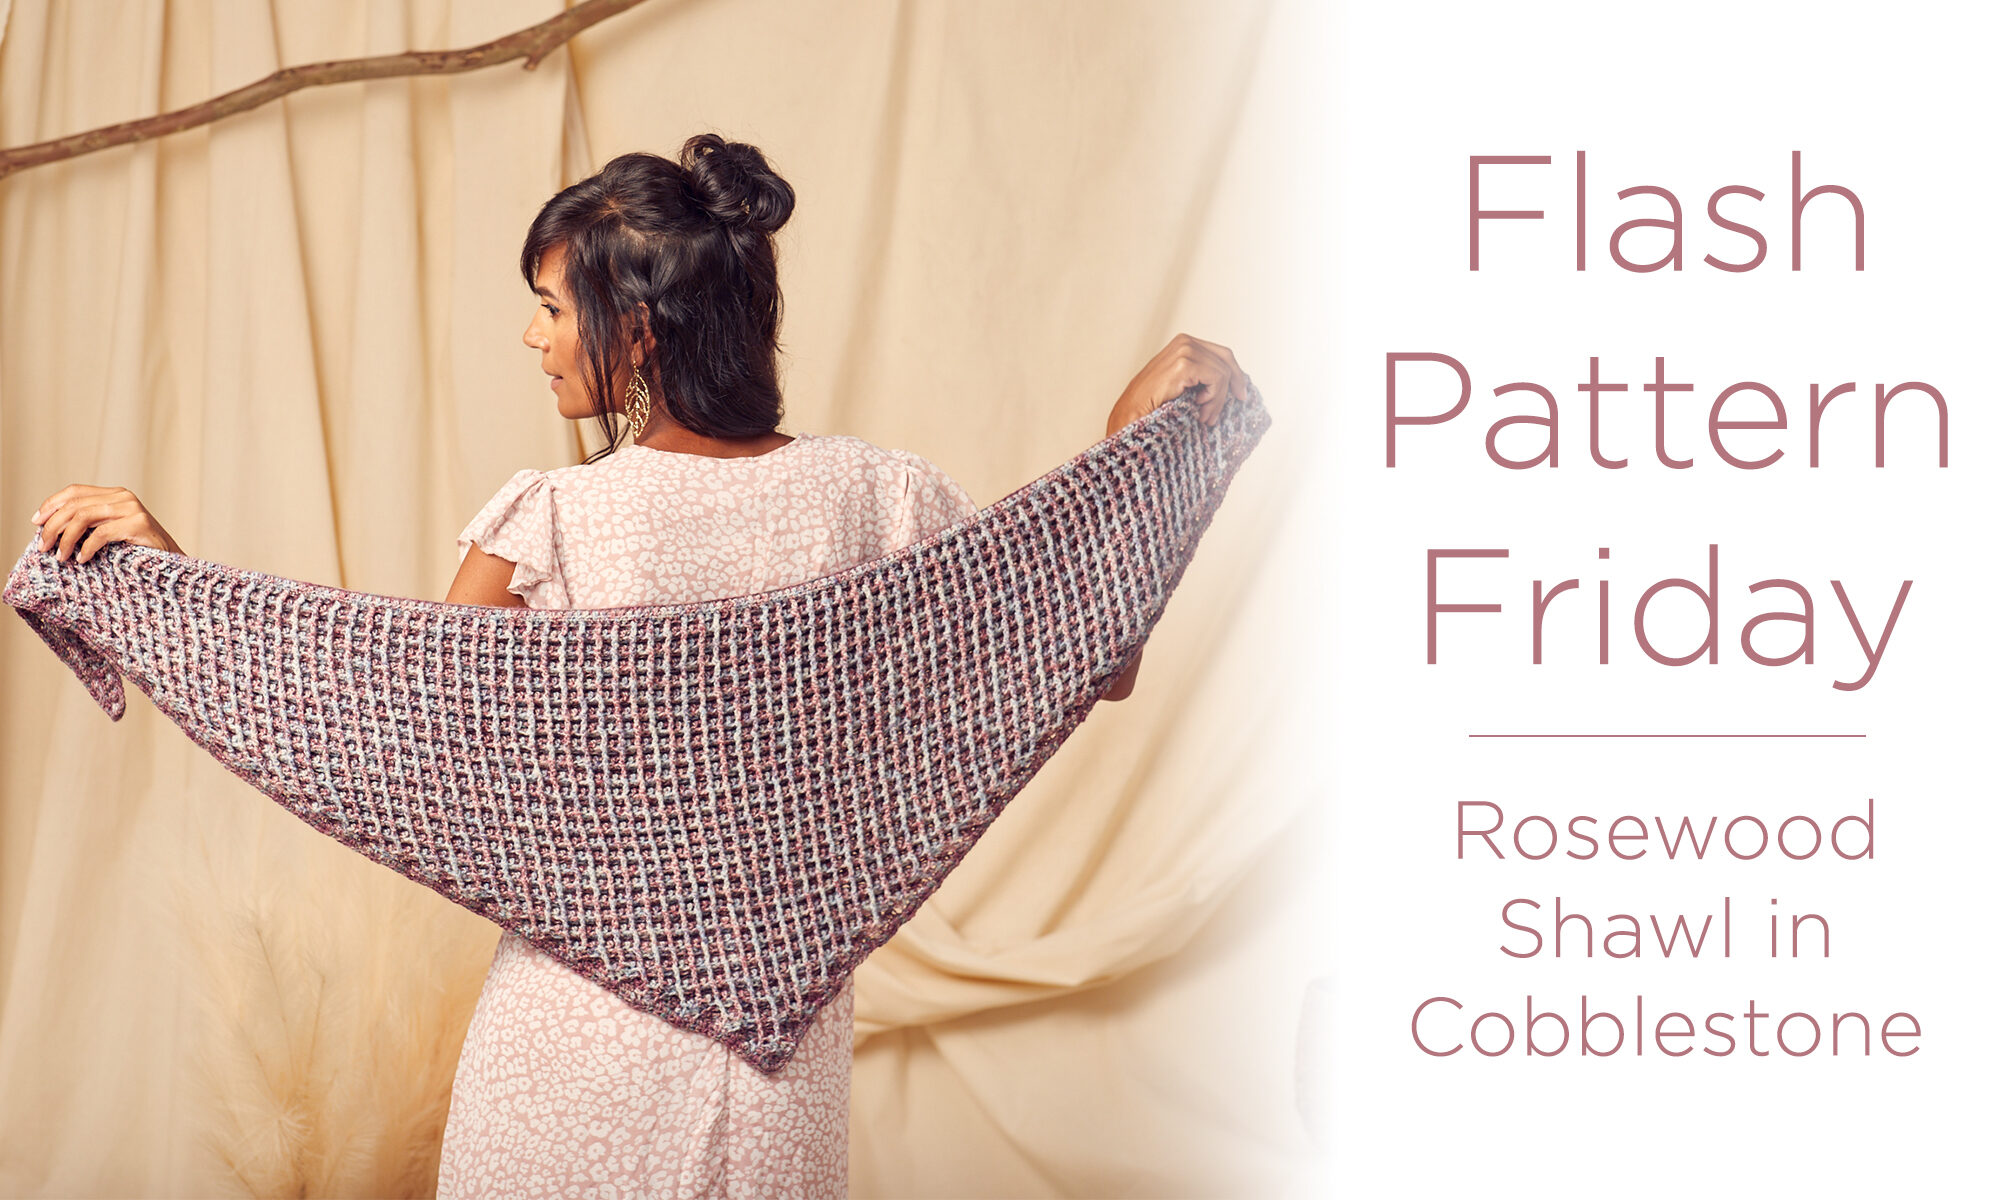 Flash Pattern Friday banner naming that the promotion this week is the Rosewood Shawl in Cobblestone.